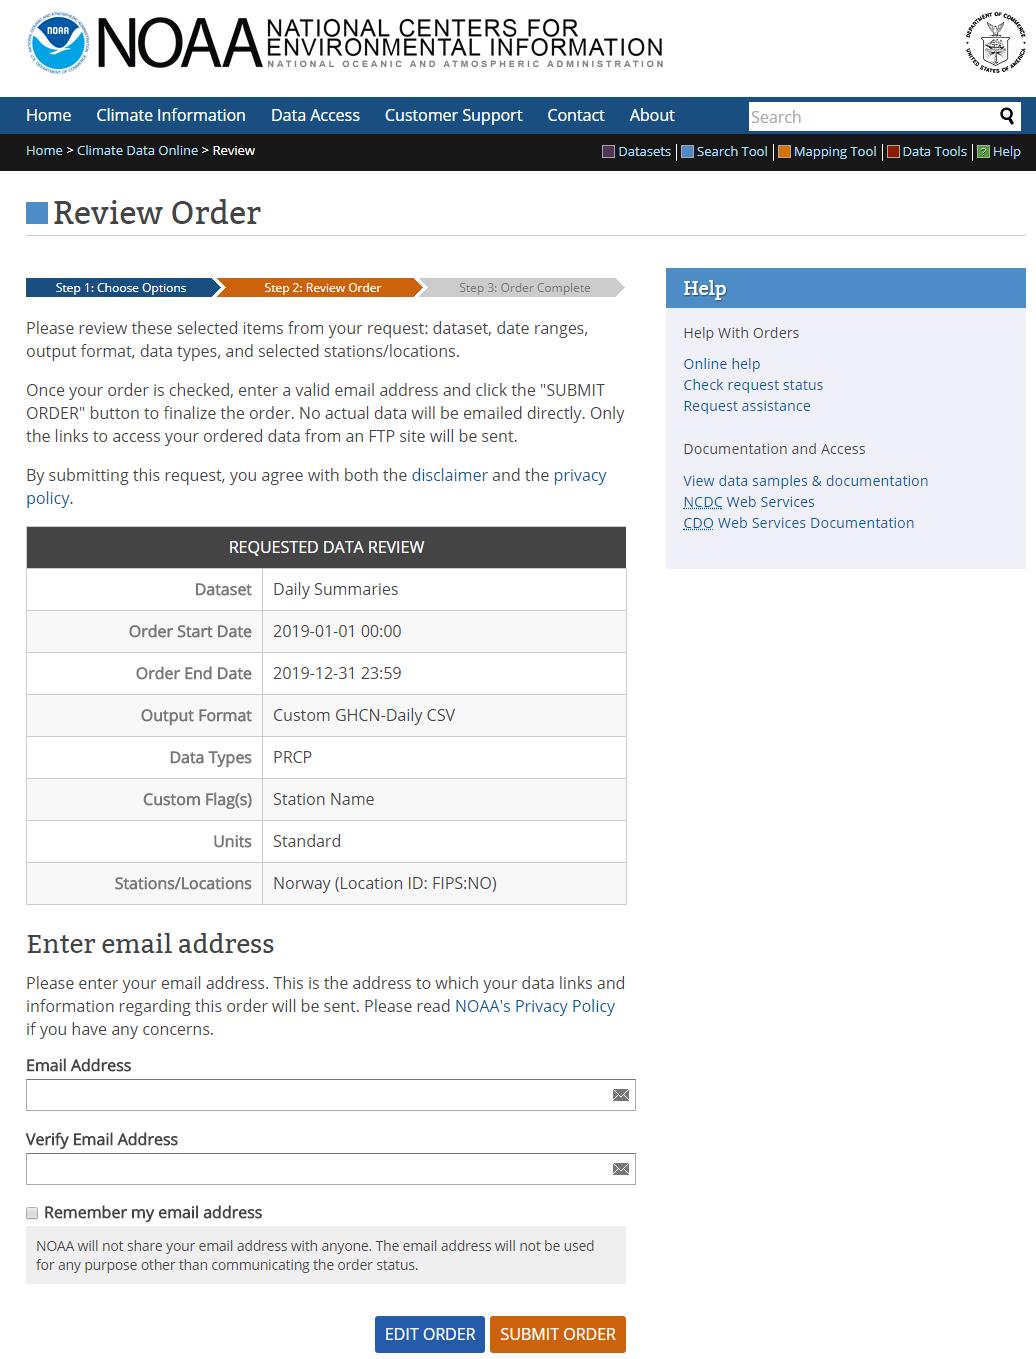 Screenshot of the Review Order page. On the left side, there is a table containing the information for your data and two boxes asking you to enter your email address below it. 